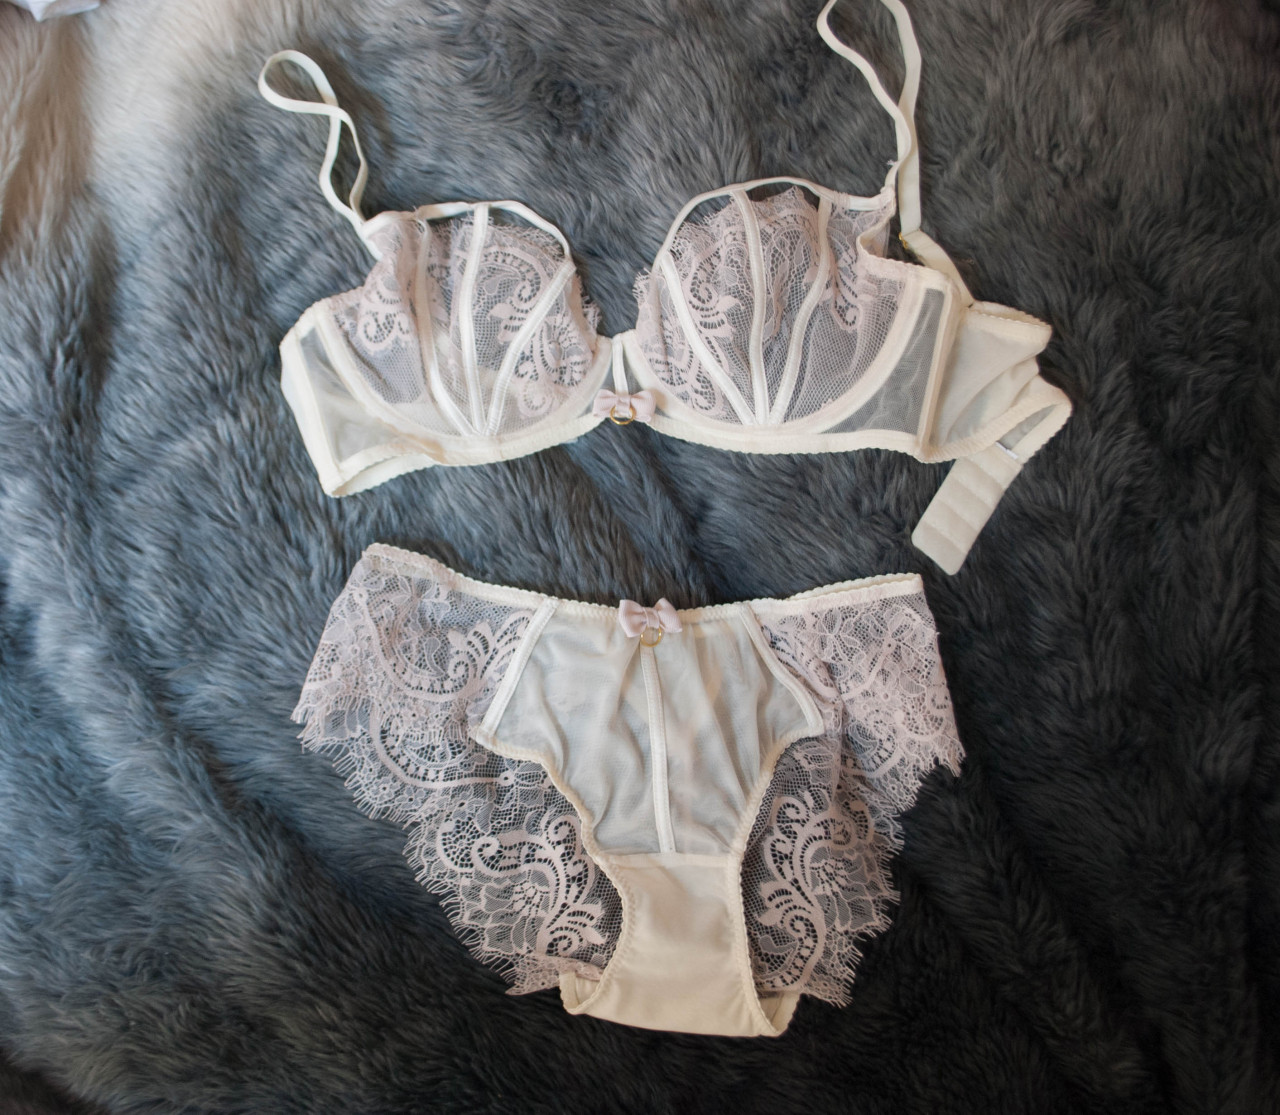 uchimada-official: Shigeko Set // Under $35 here - For the Love of Lingerie